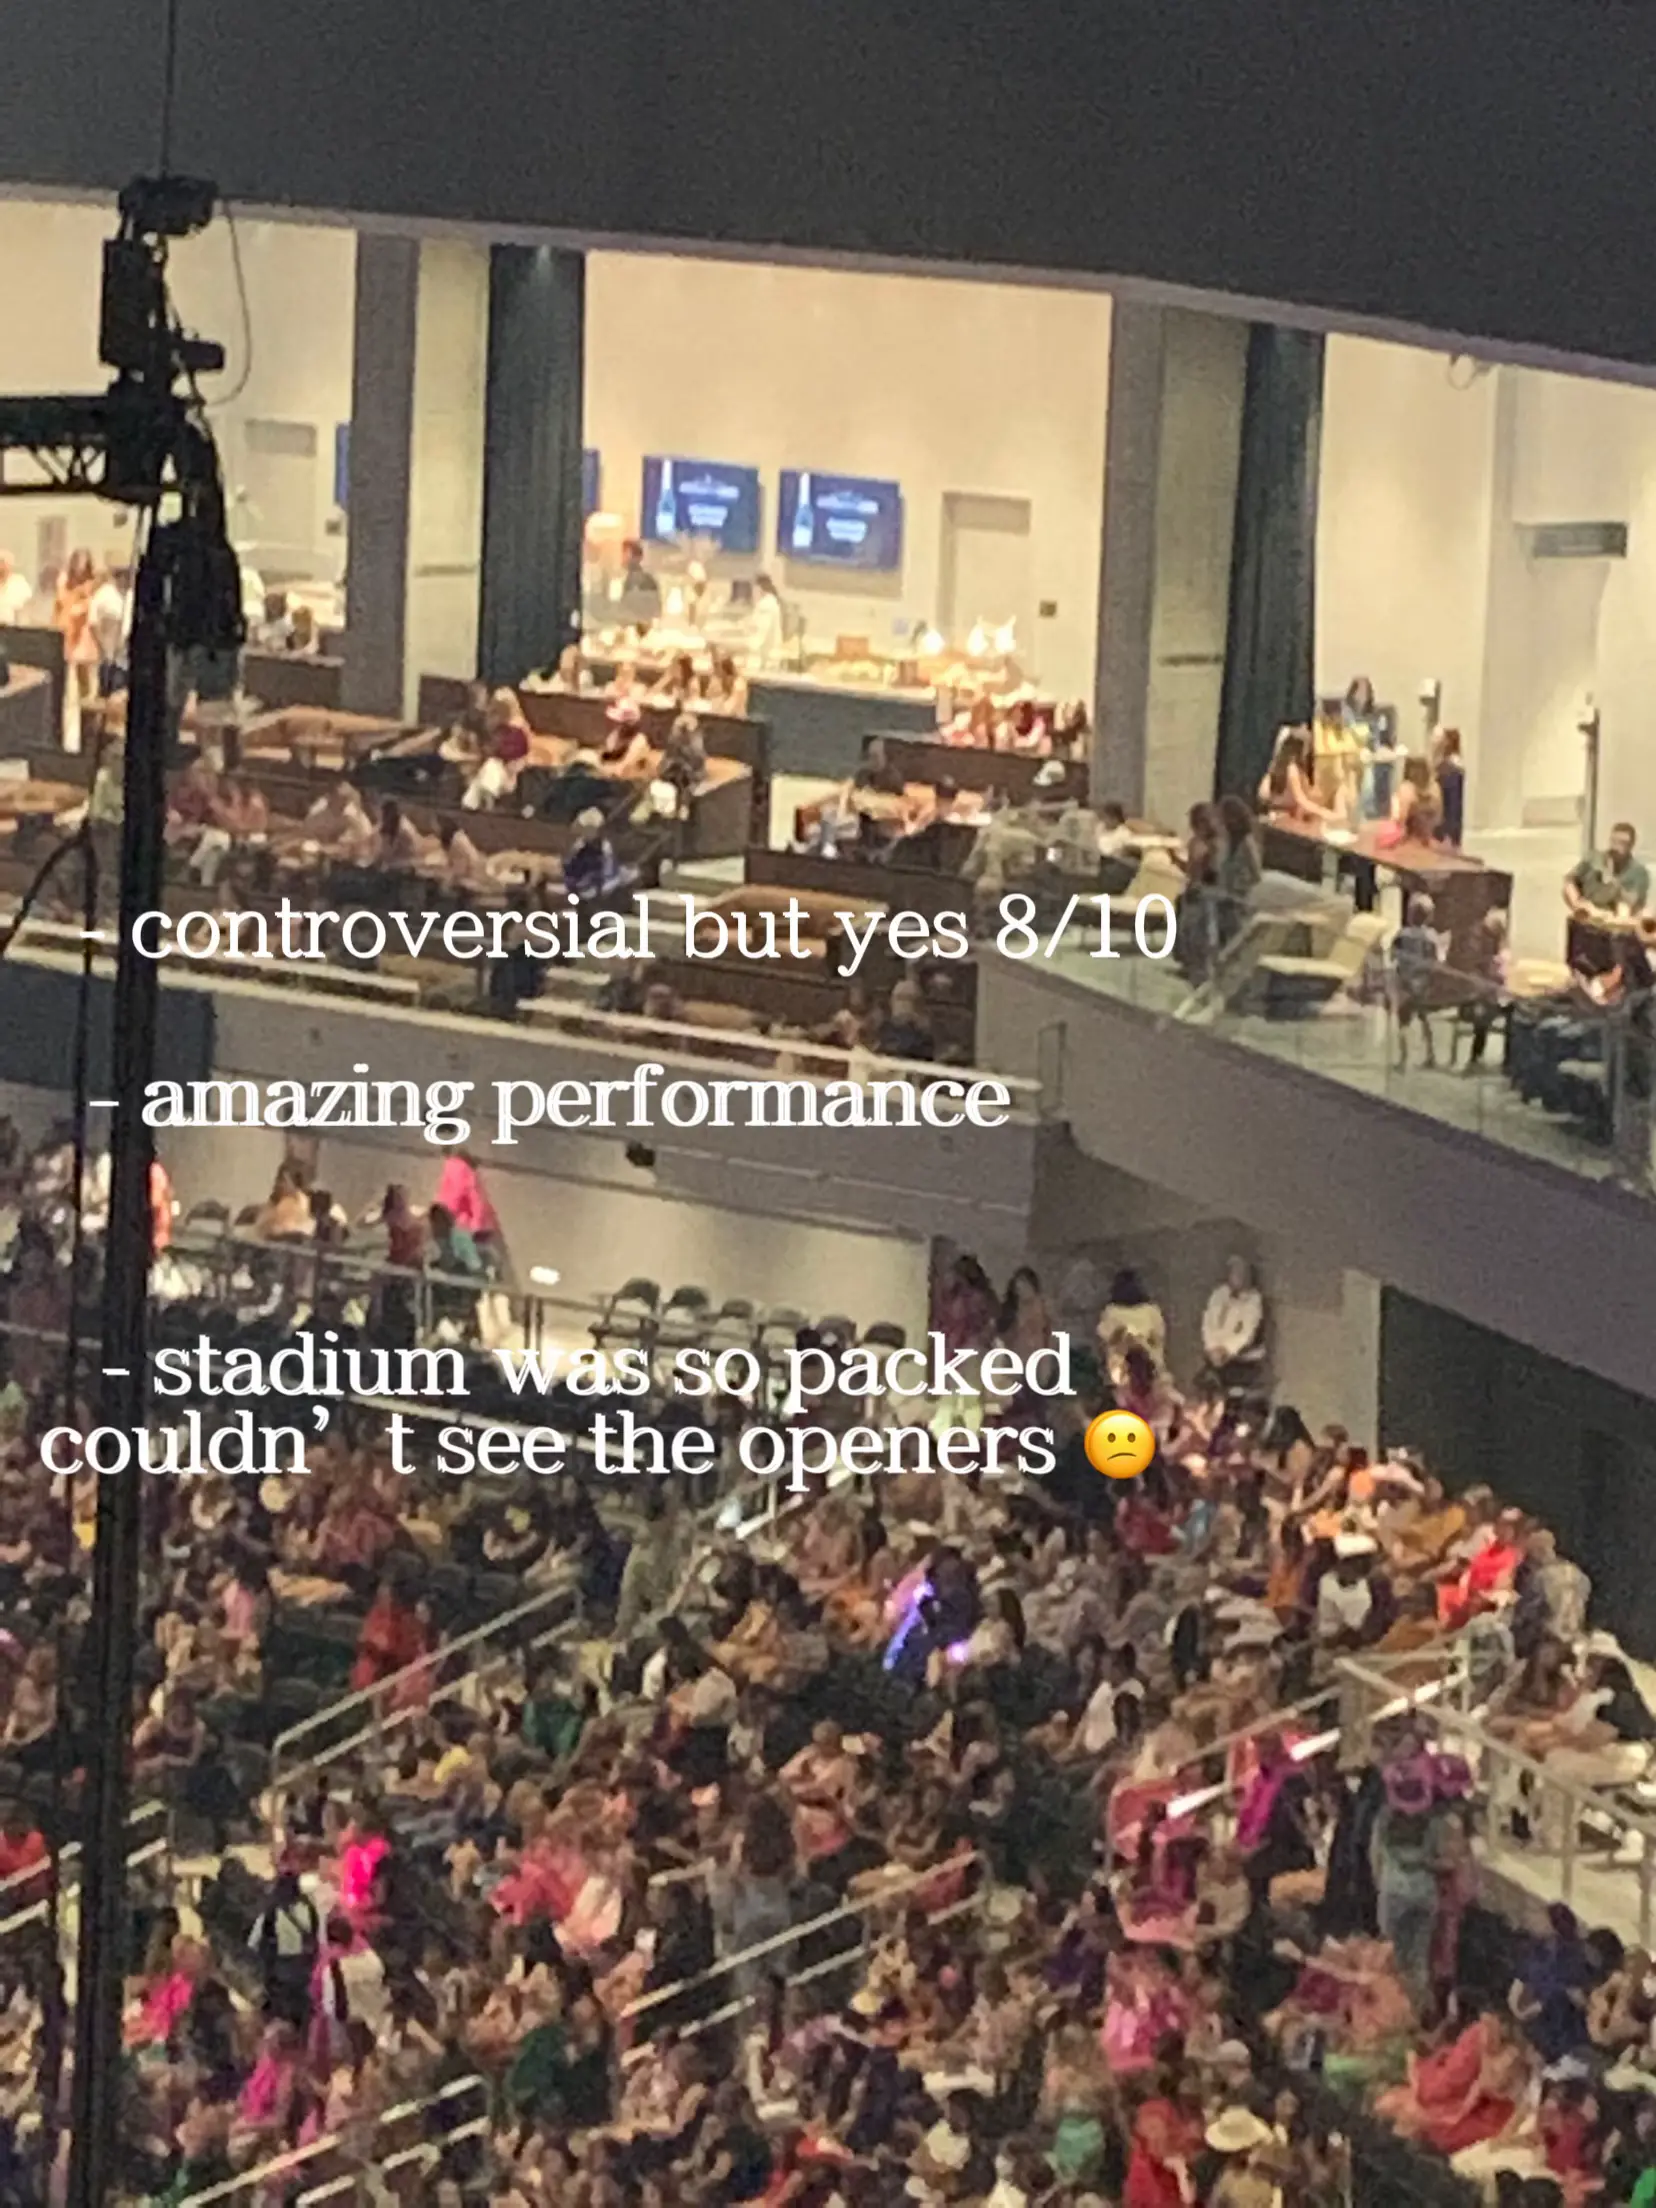  A large crowd of people are gathered in a stadium, watching a concert. The performance is described as controversial but yes, and the audience is described